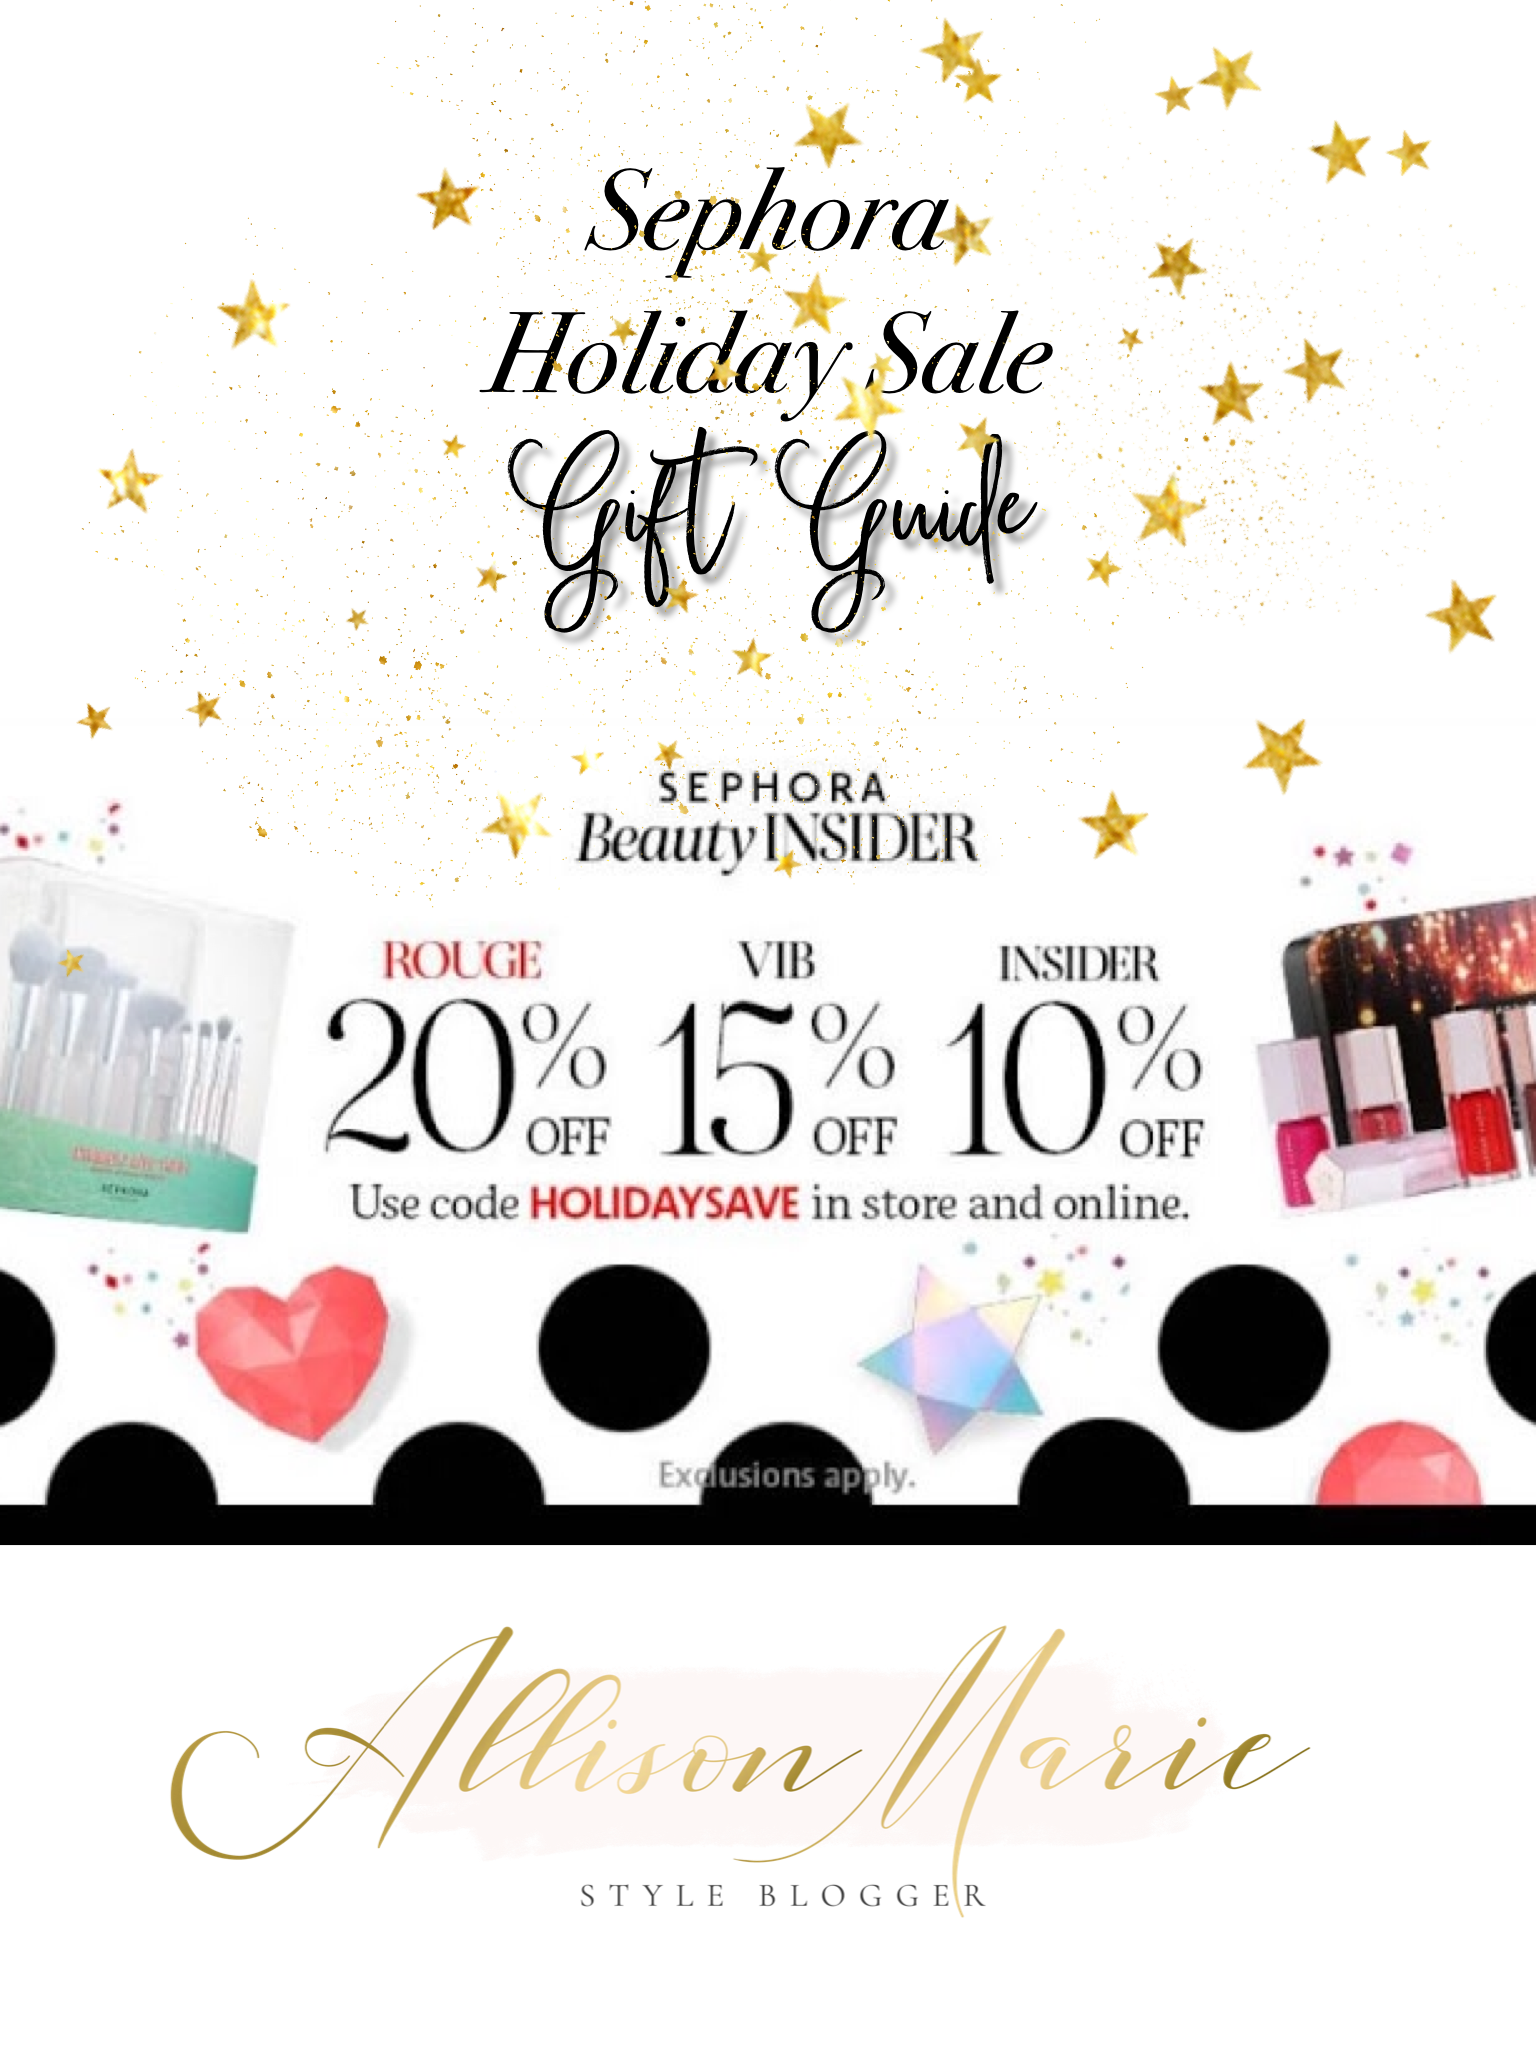 What To Get At The Sephora Holiday Sale